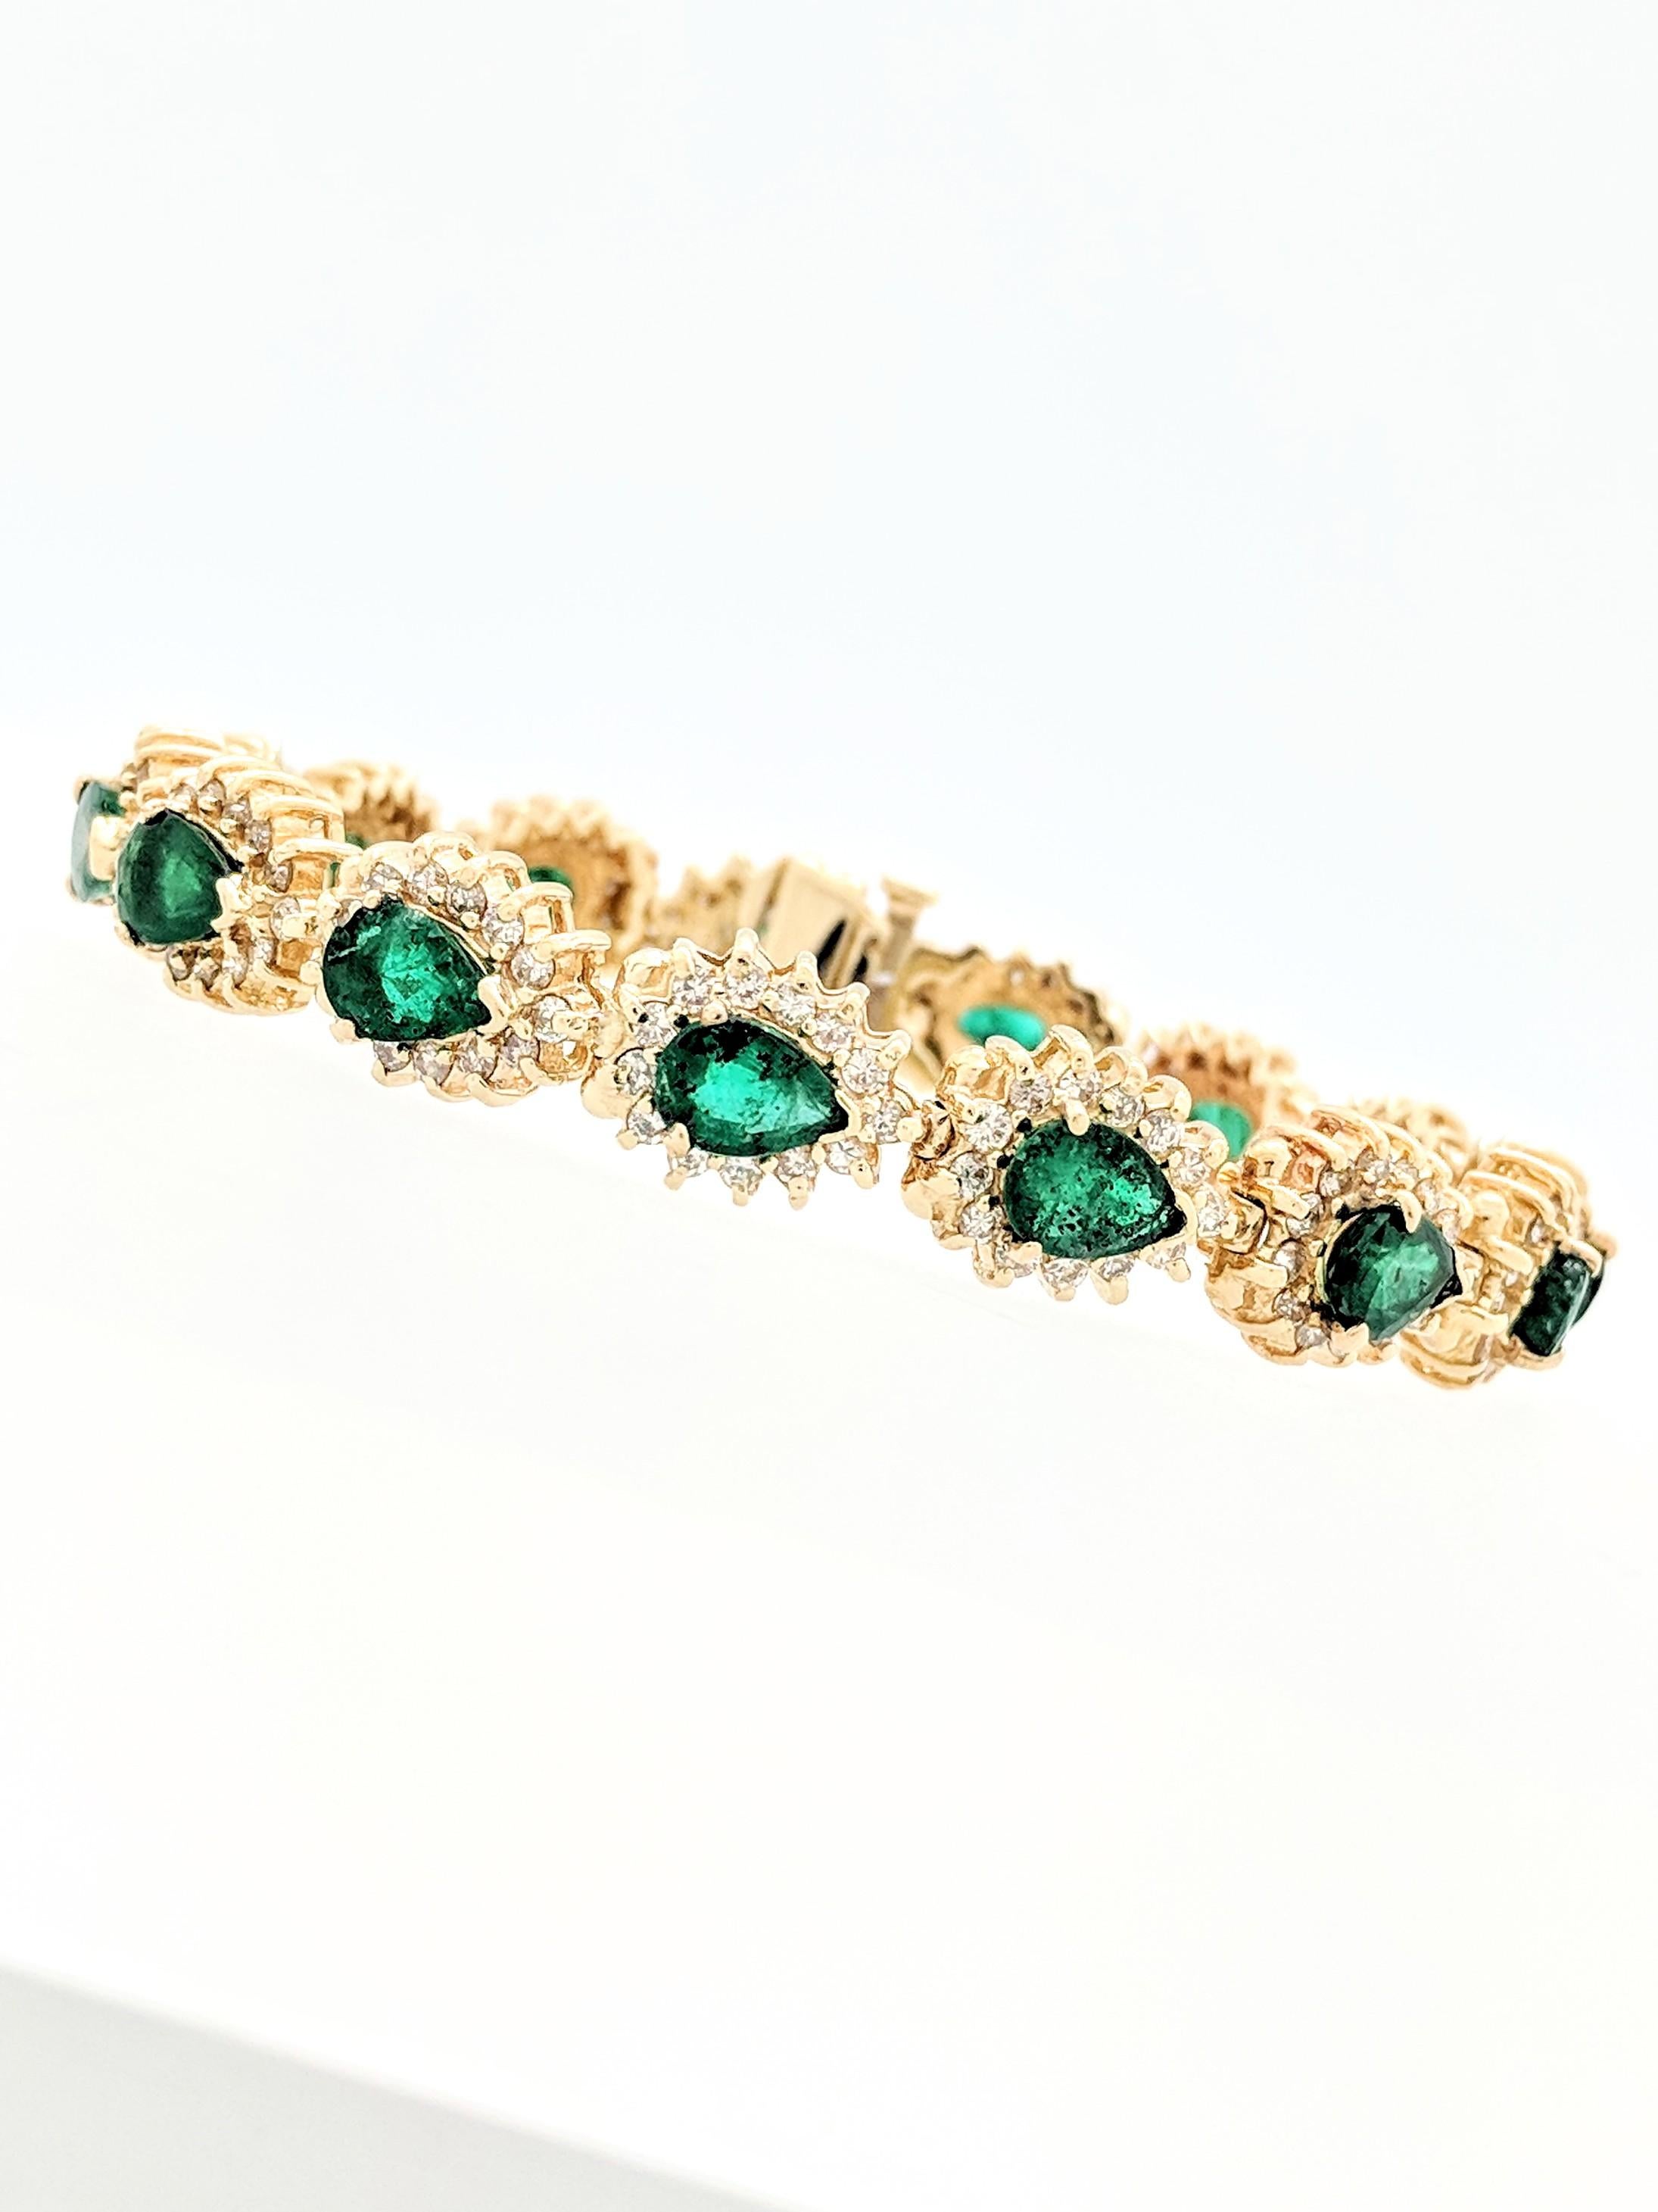 You are viewing a beautiful Emerald & Diamond Tennis Bracelet. This is truly a stunning piece that any woman would love to add to their collection.

This bracelet consist of emerald and diamond cluster design. The emeralds are pear shaped and